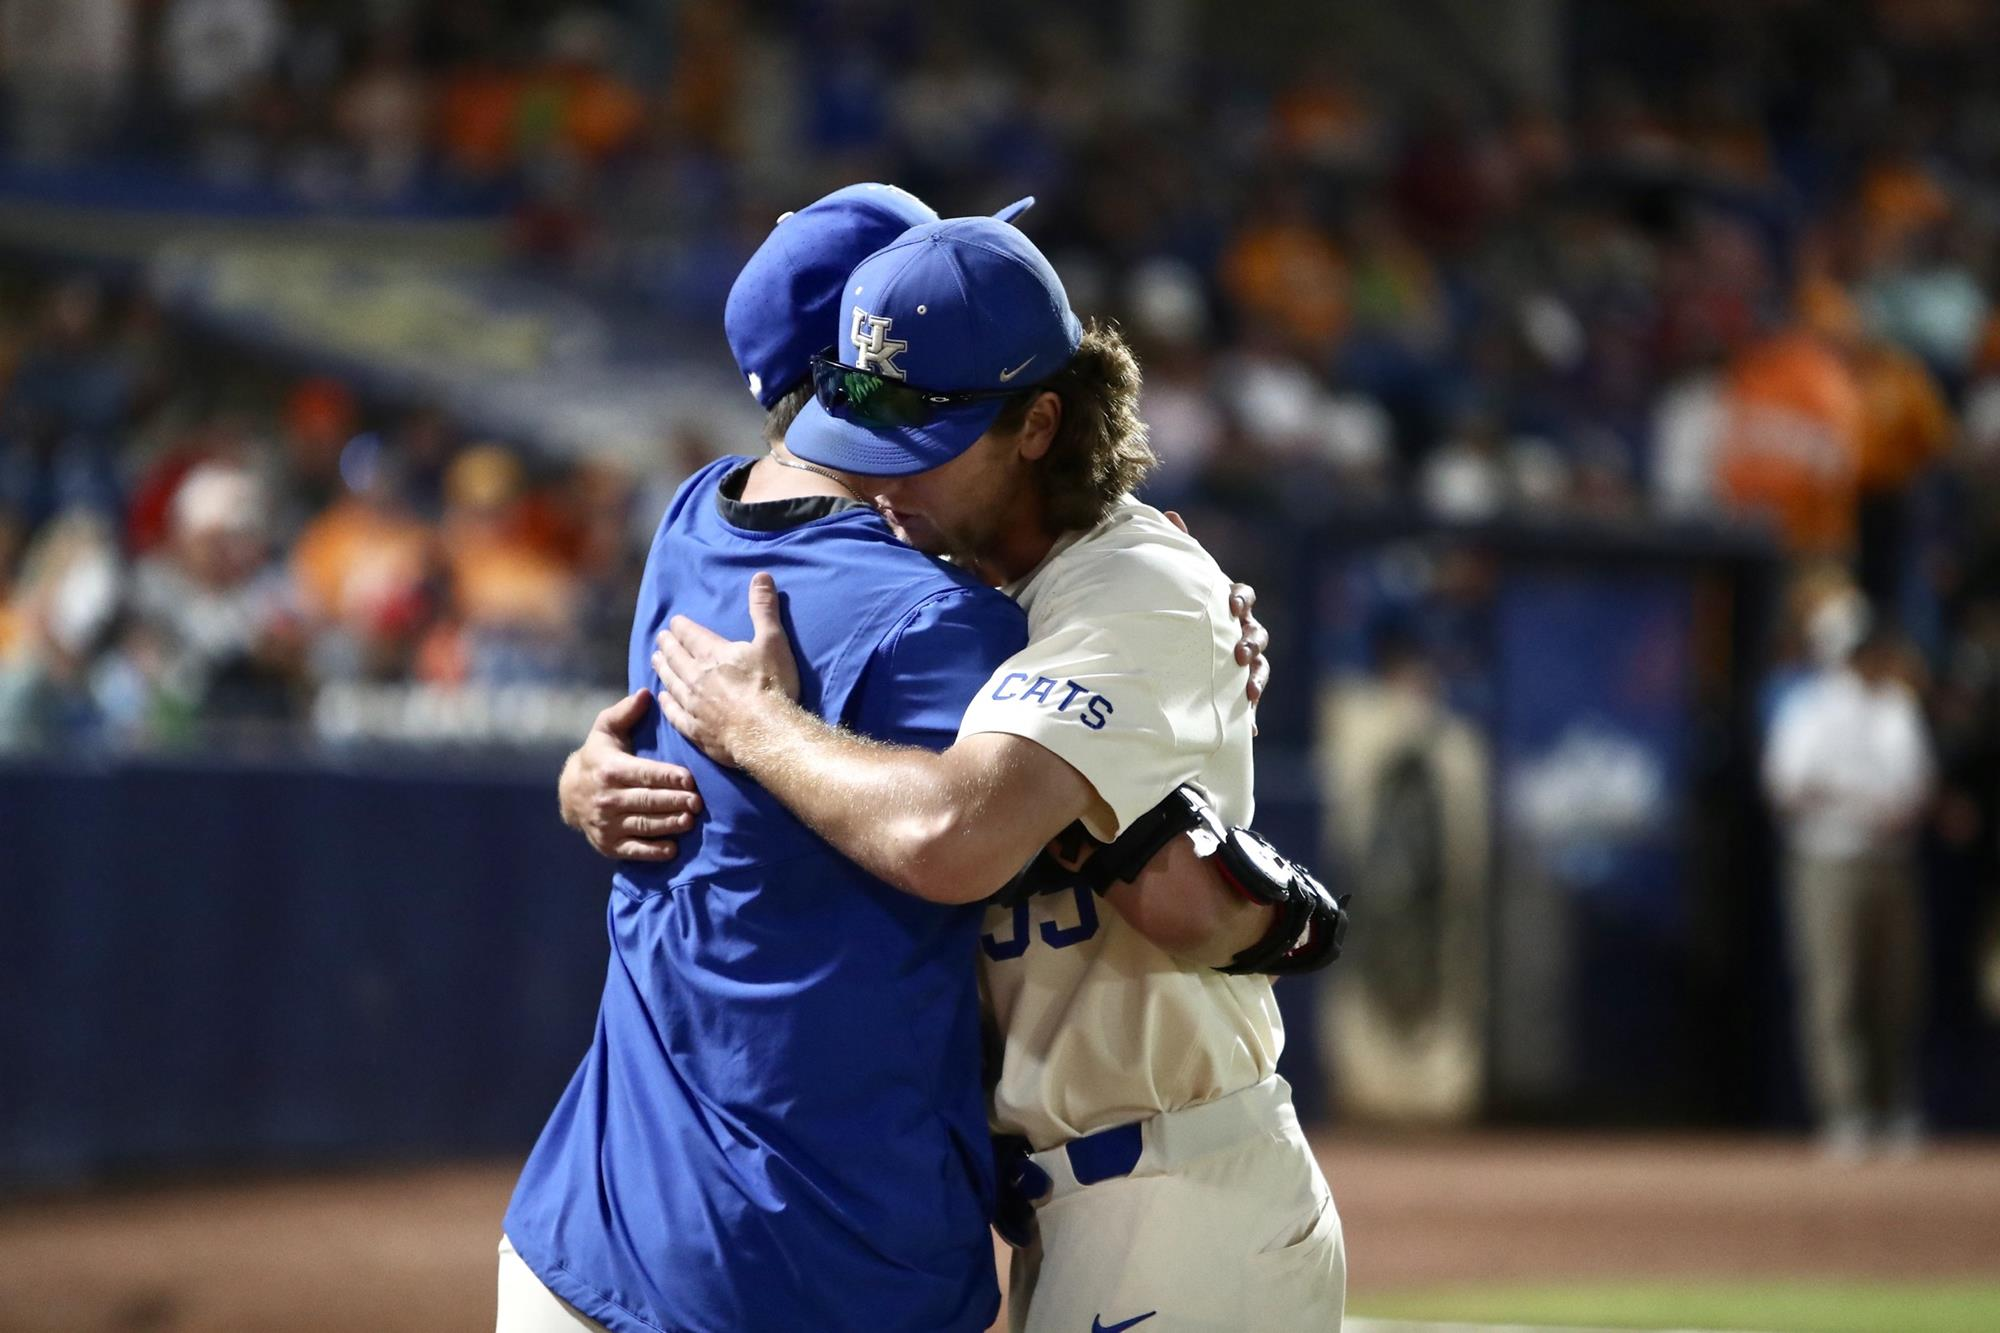 Kentucky’s Magical Run in Hoover Comes to Close